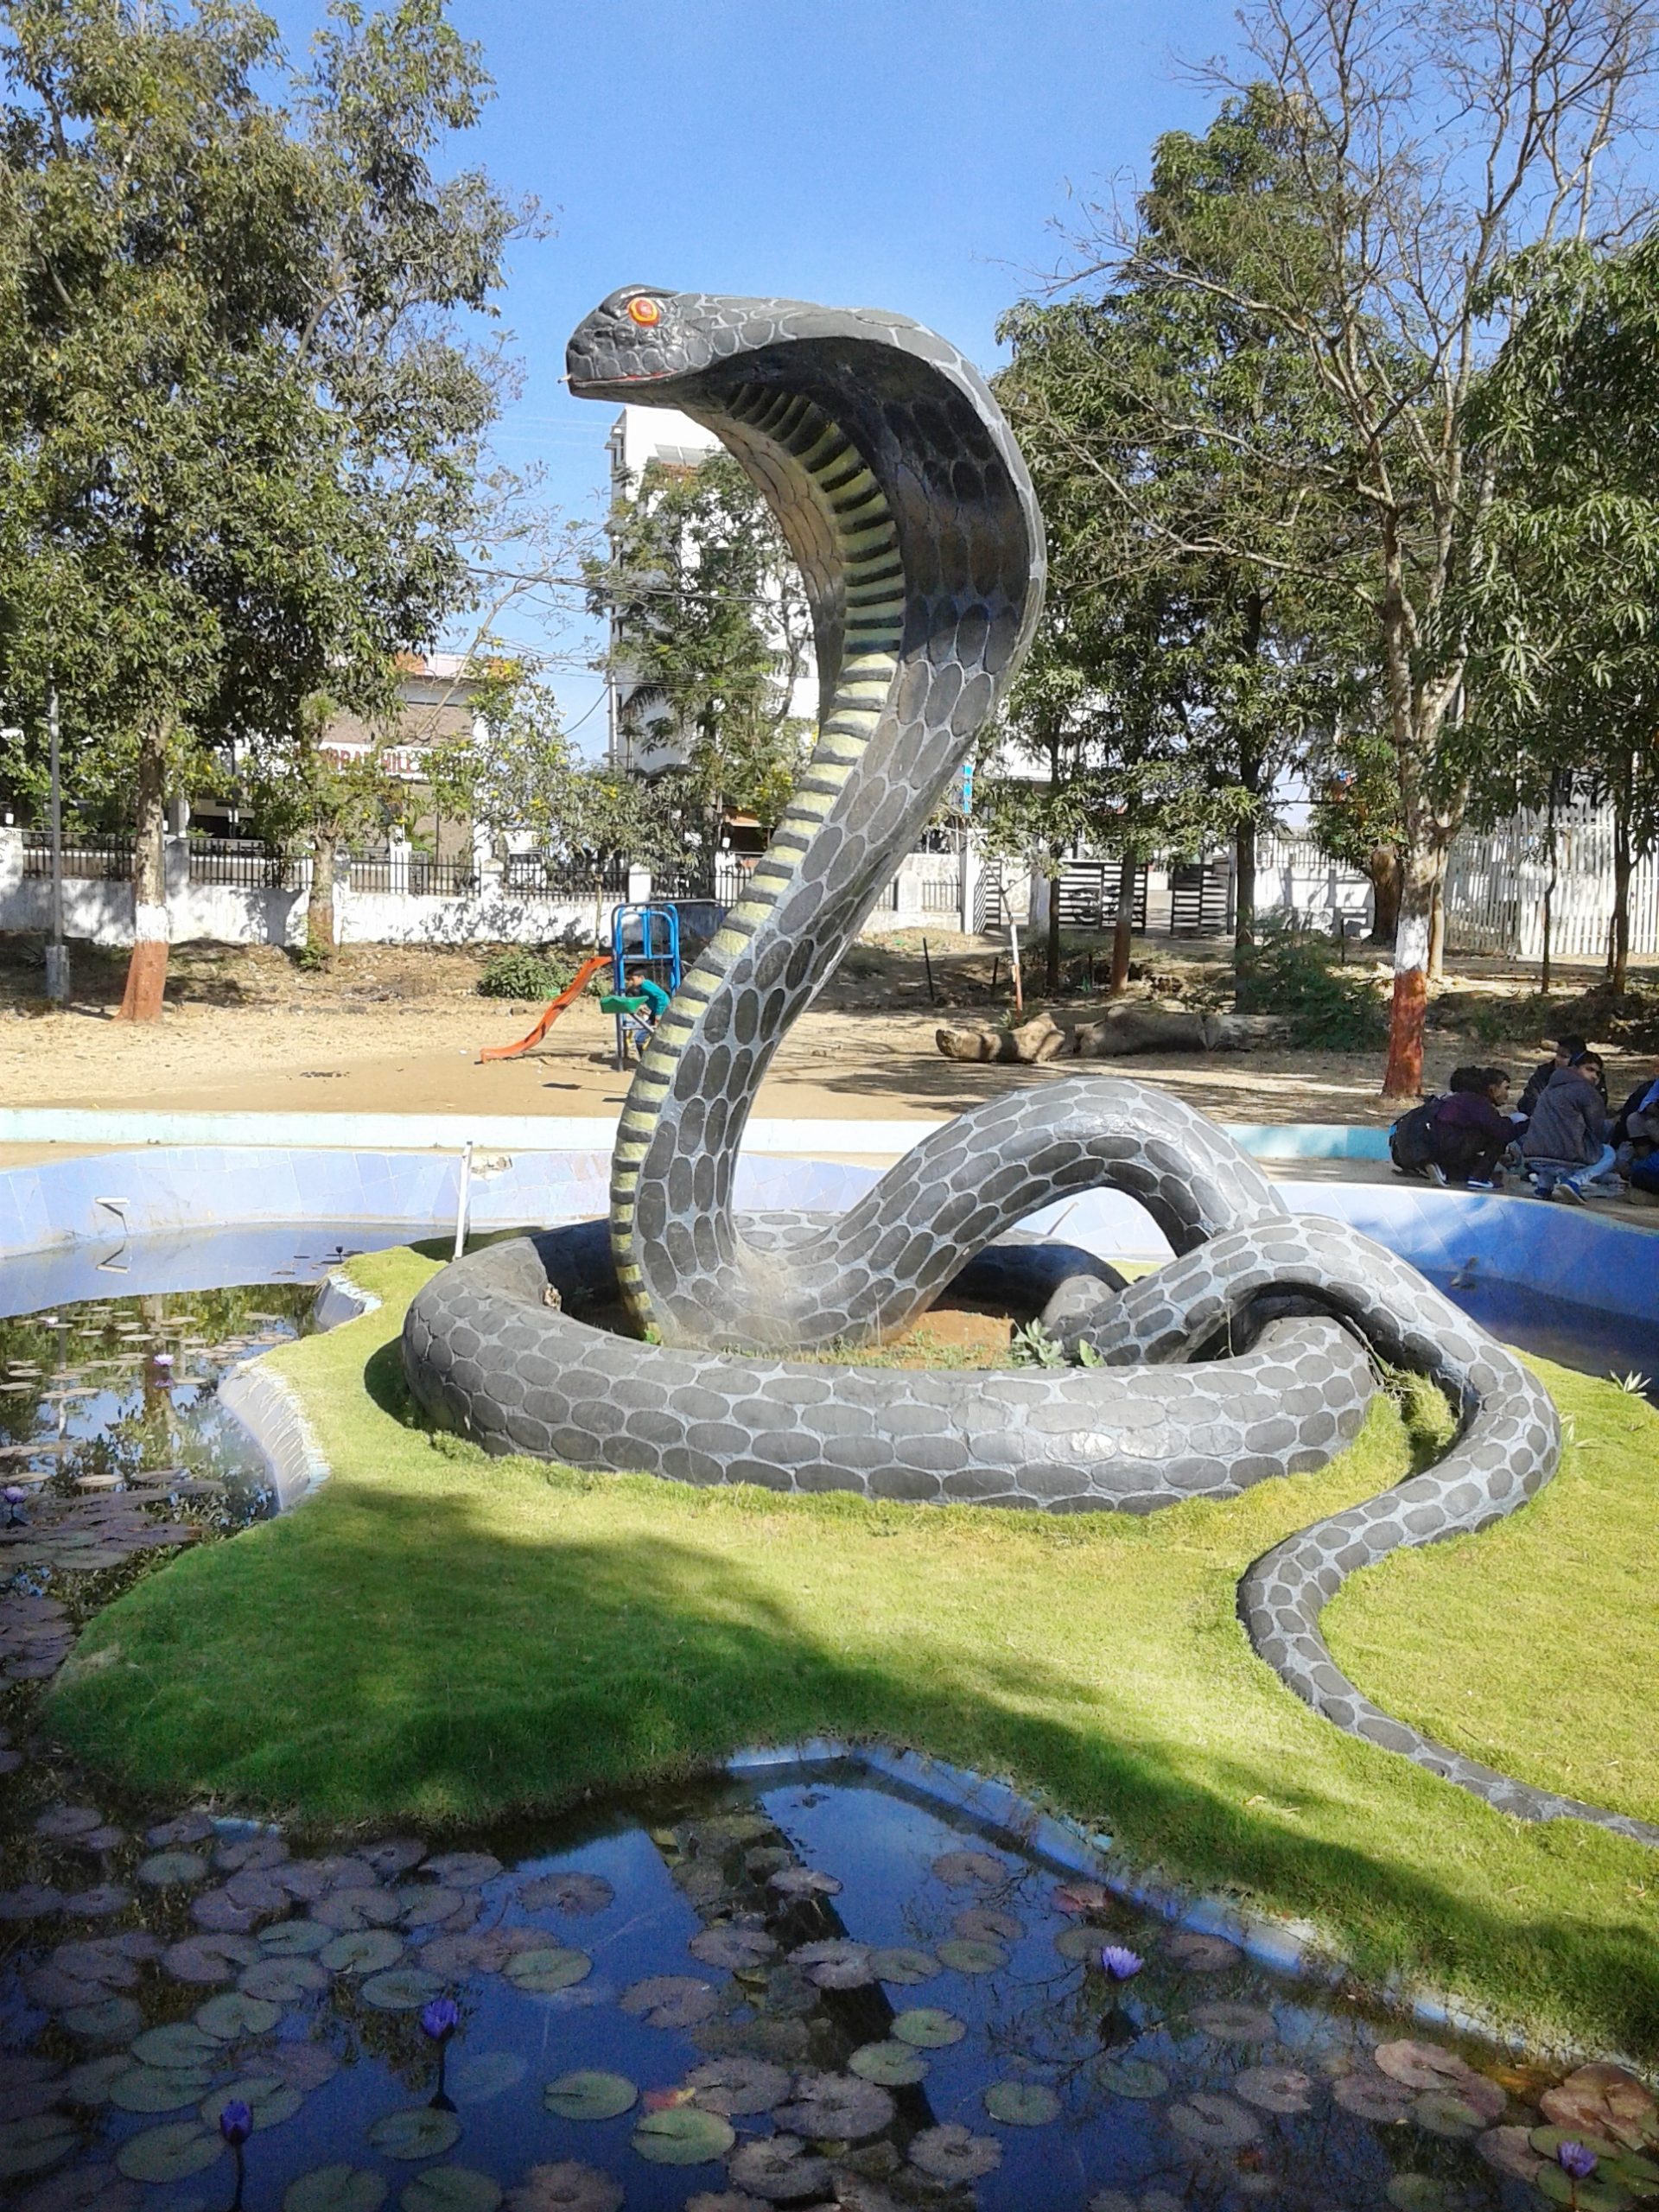 A statue of a snake